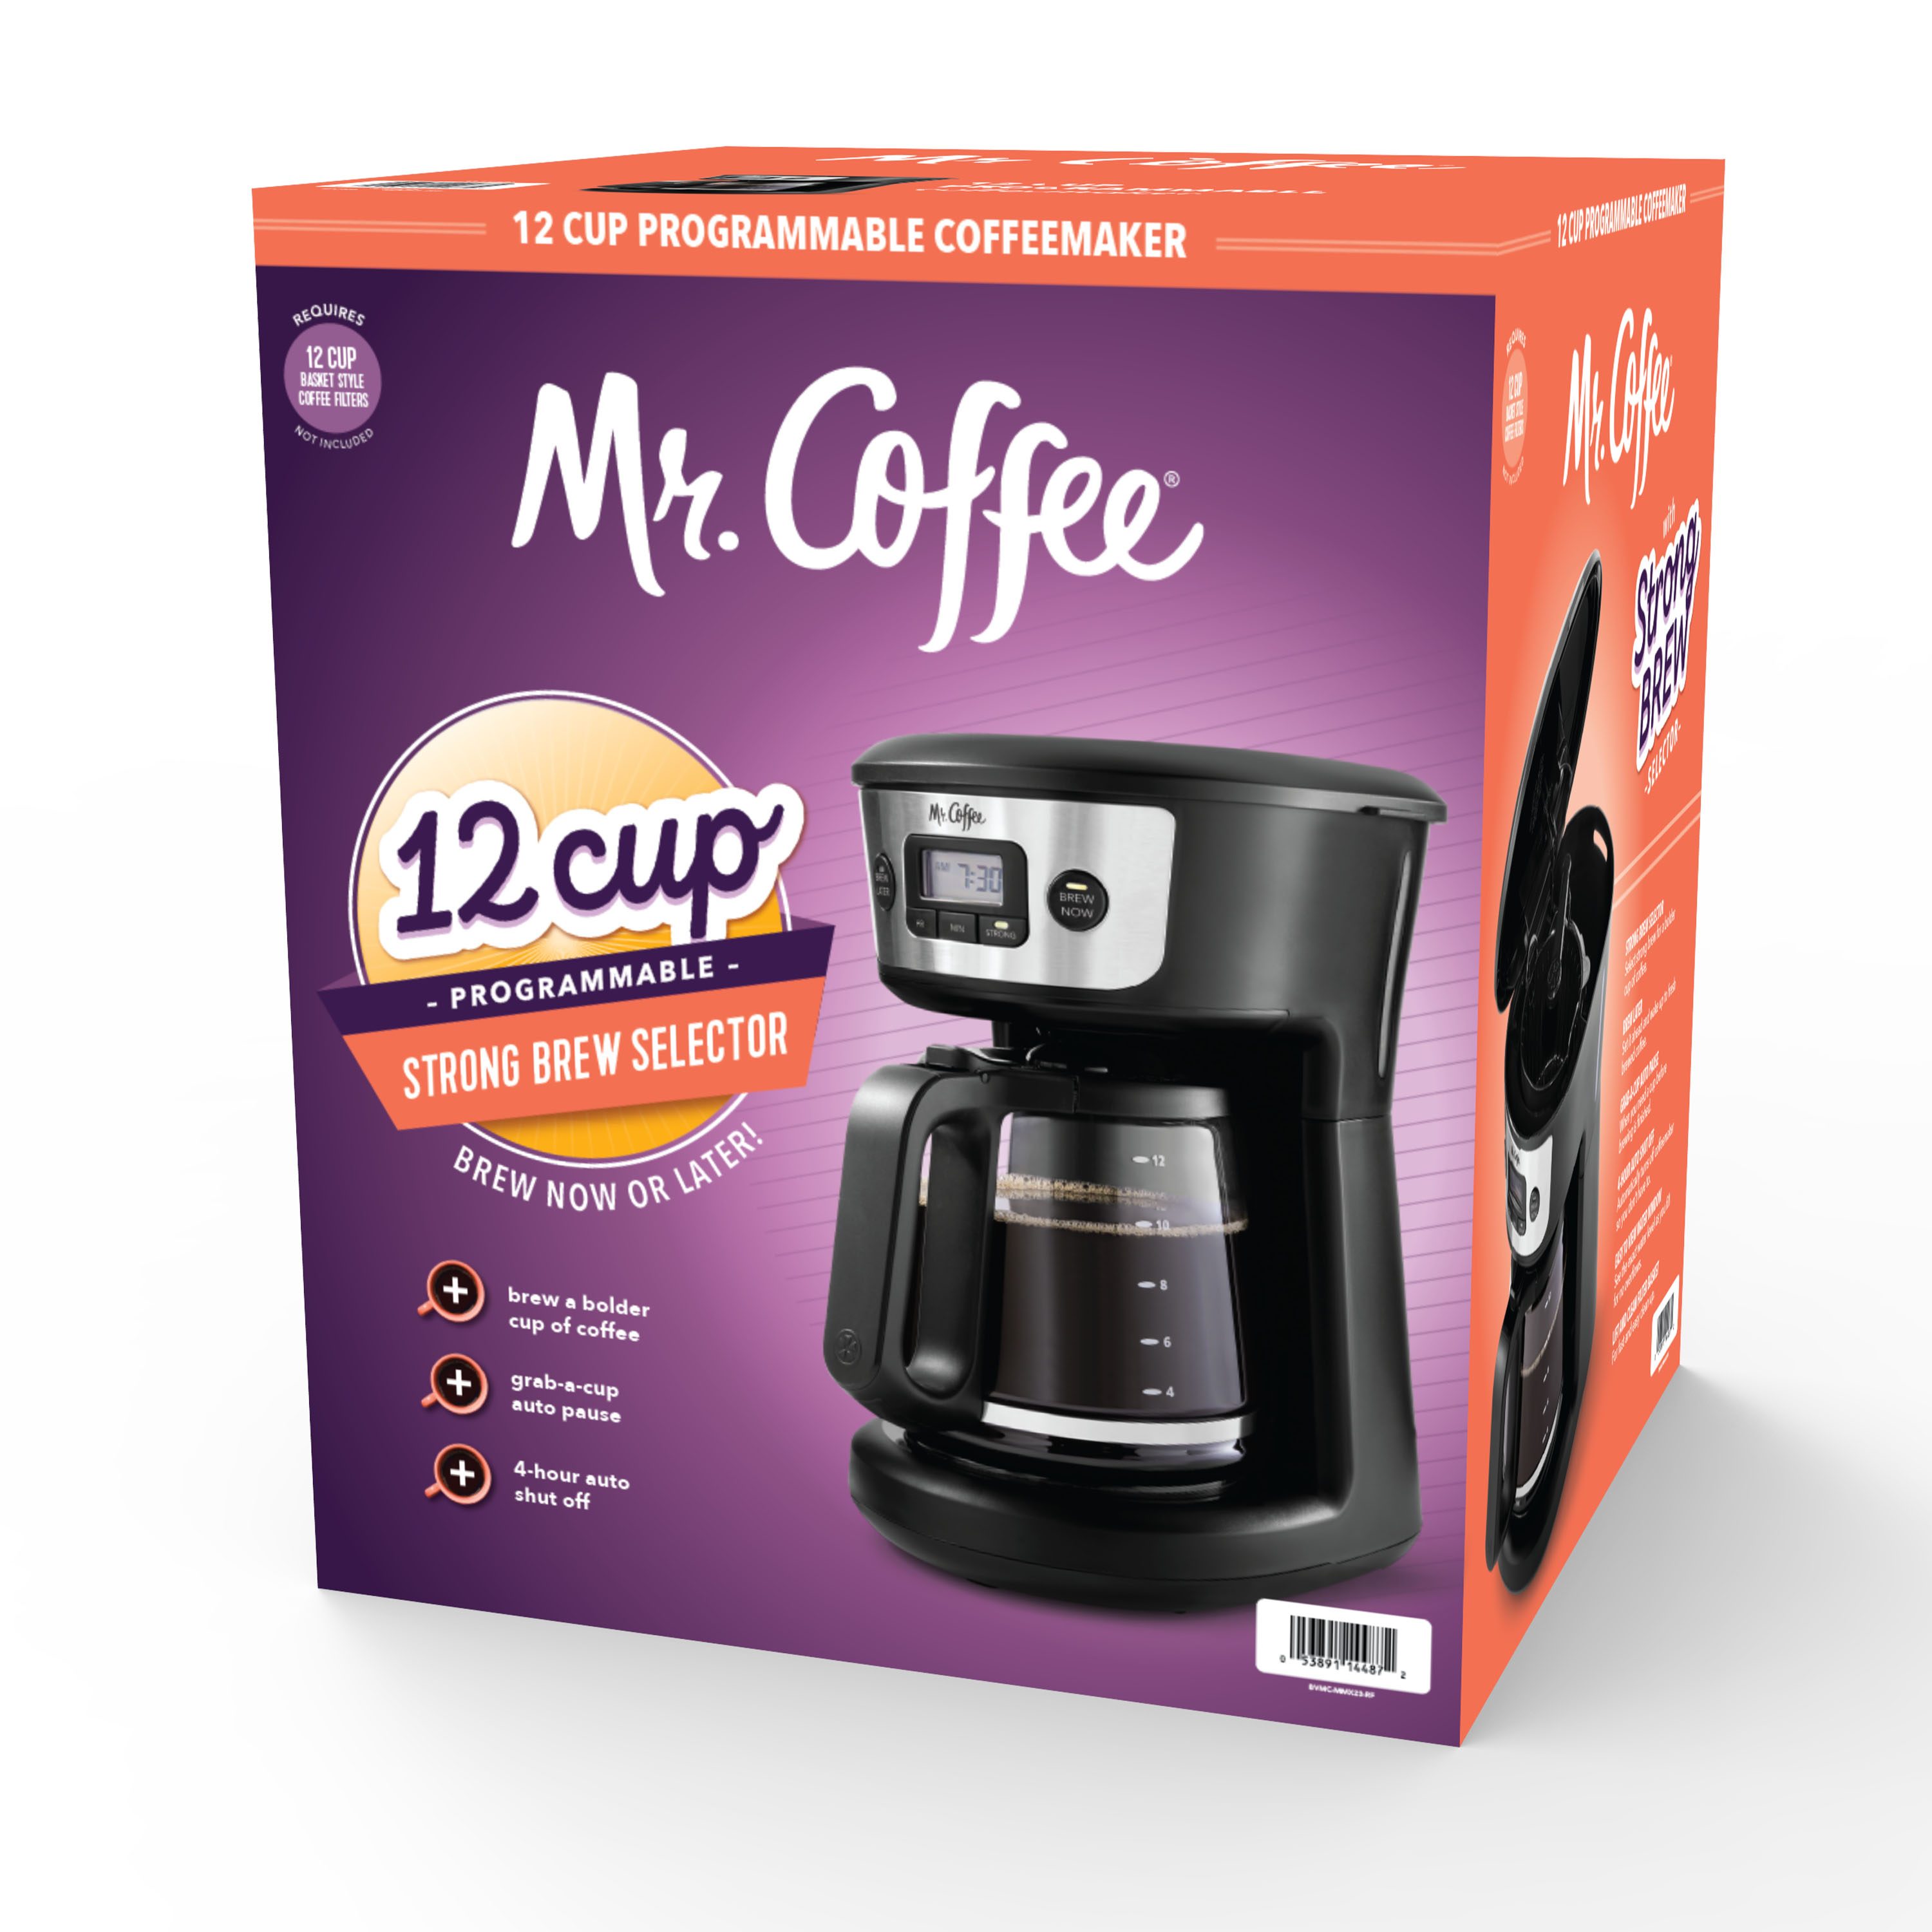 Mr. Coffee® 12-Cup Programmable Coffee Maker with Strong Brew Selector, Stainless Steel - image 4 of 10